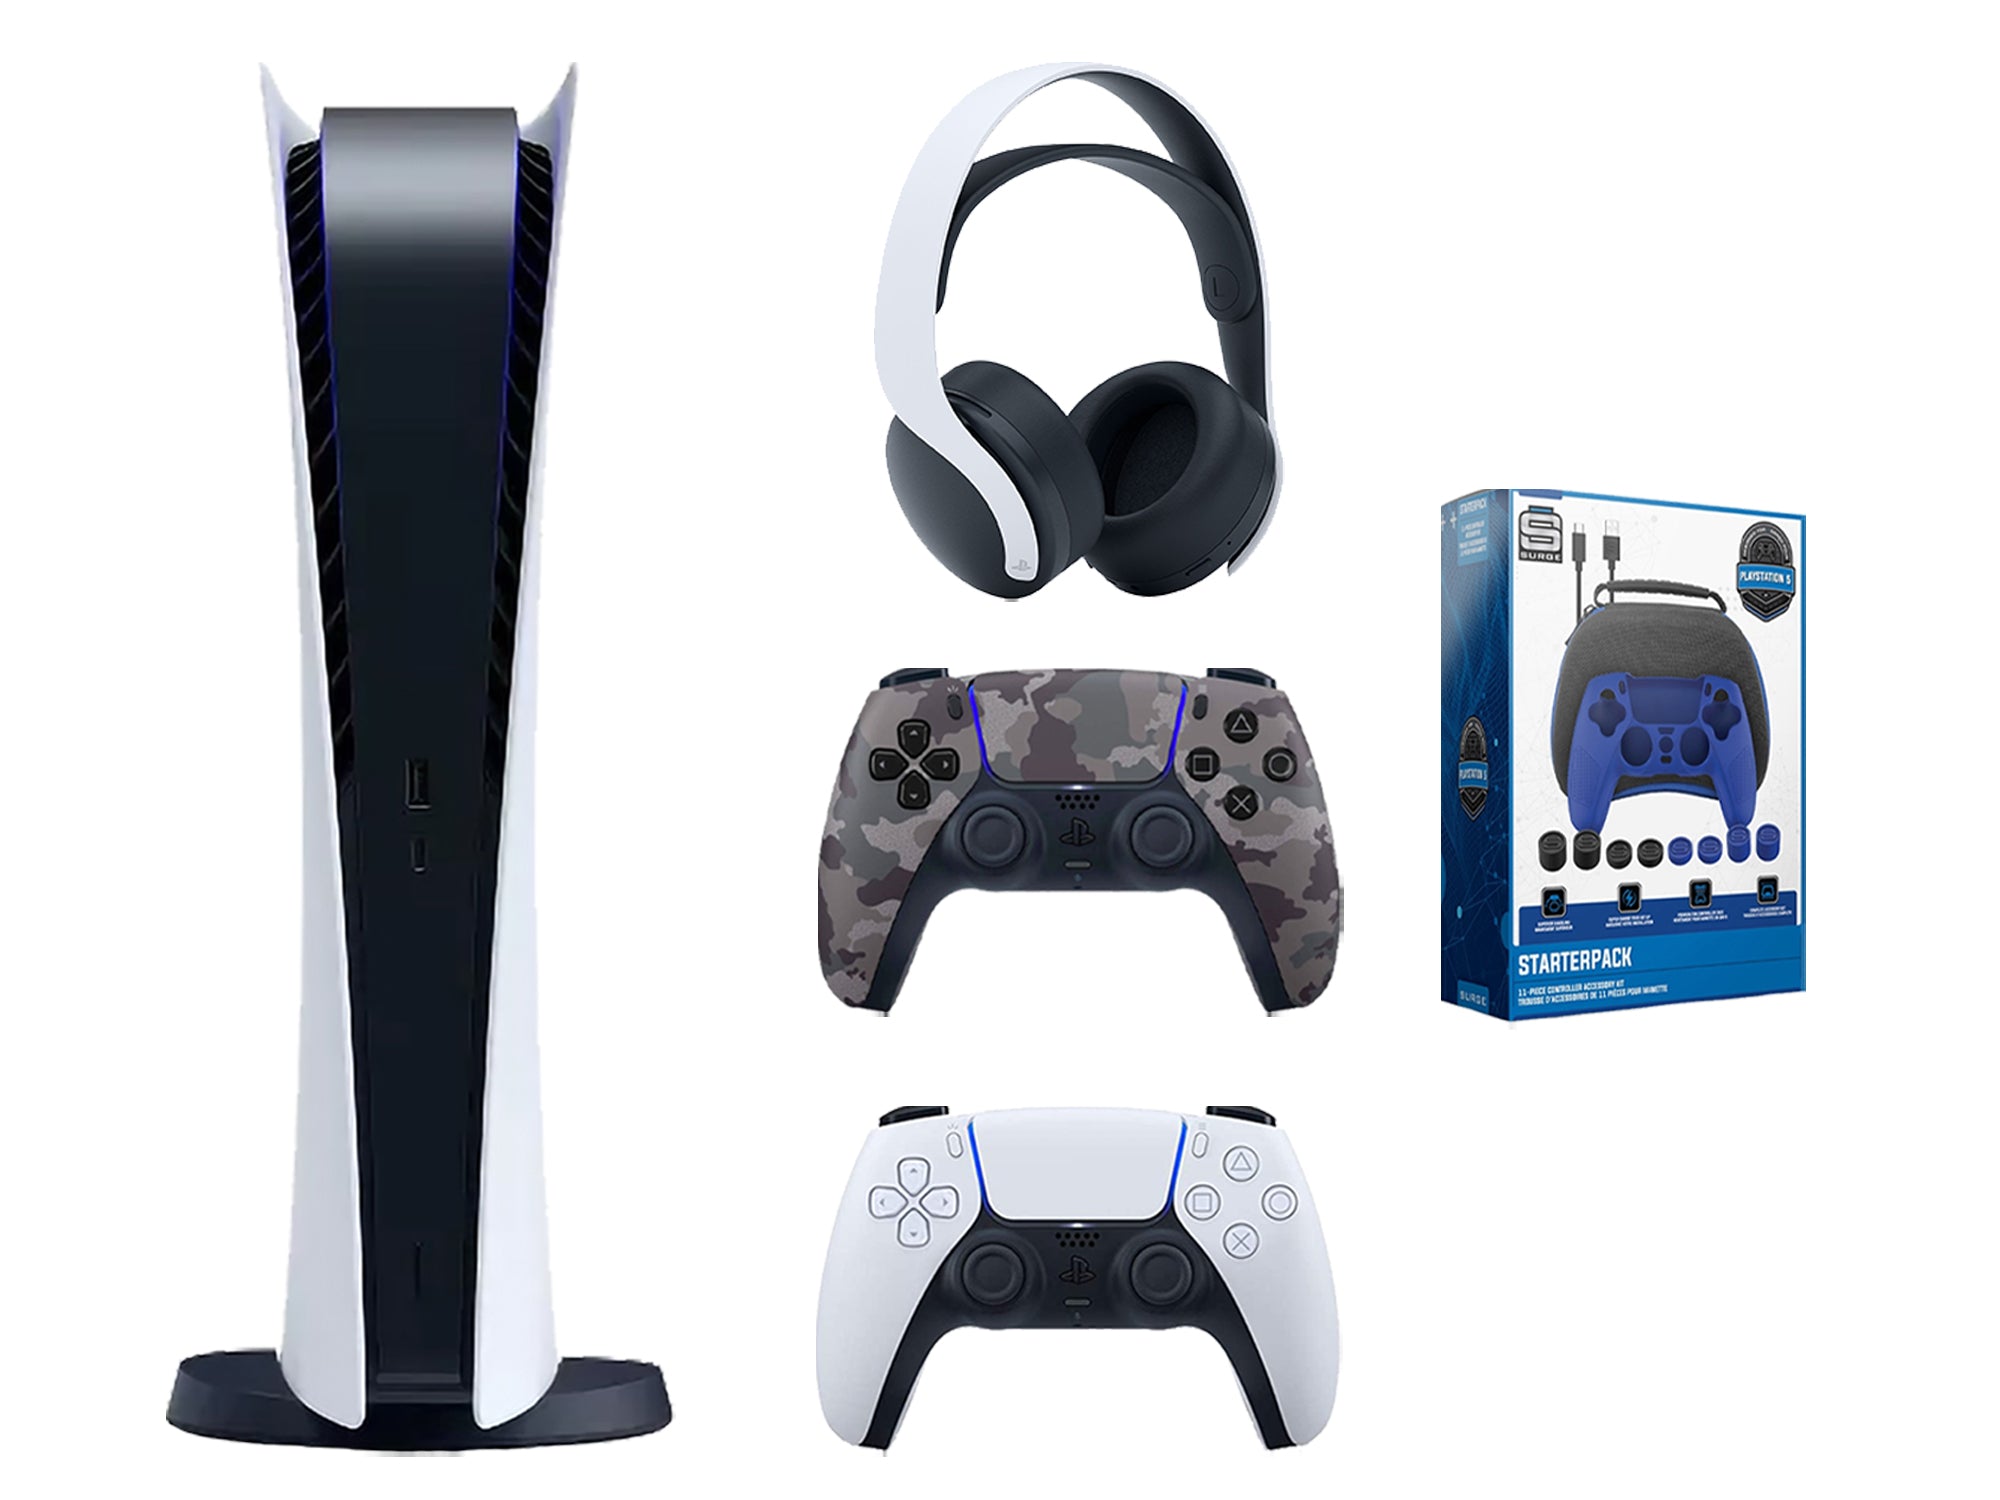 Sony Playstation 5 Digital Edition Bundle with Extra Gray Camo Controller, White PULSE 3D Wireless Headset and Gamer Starter Pack - Pro-Distributing